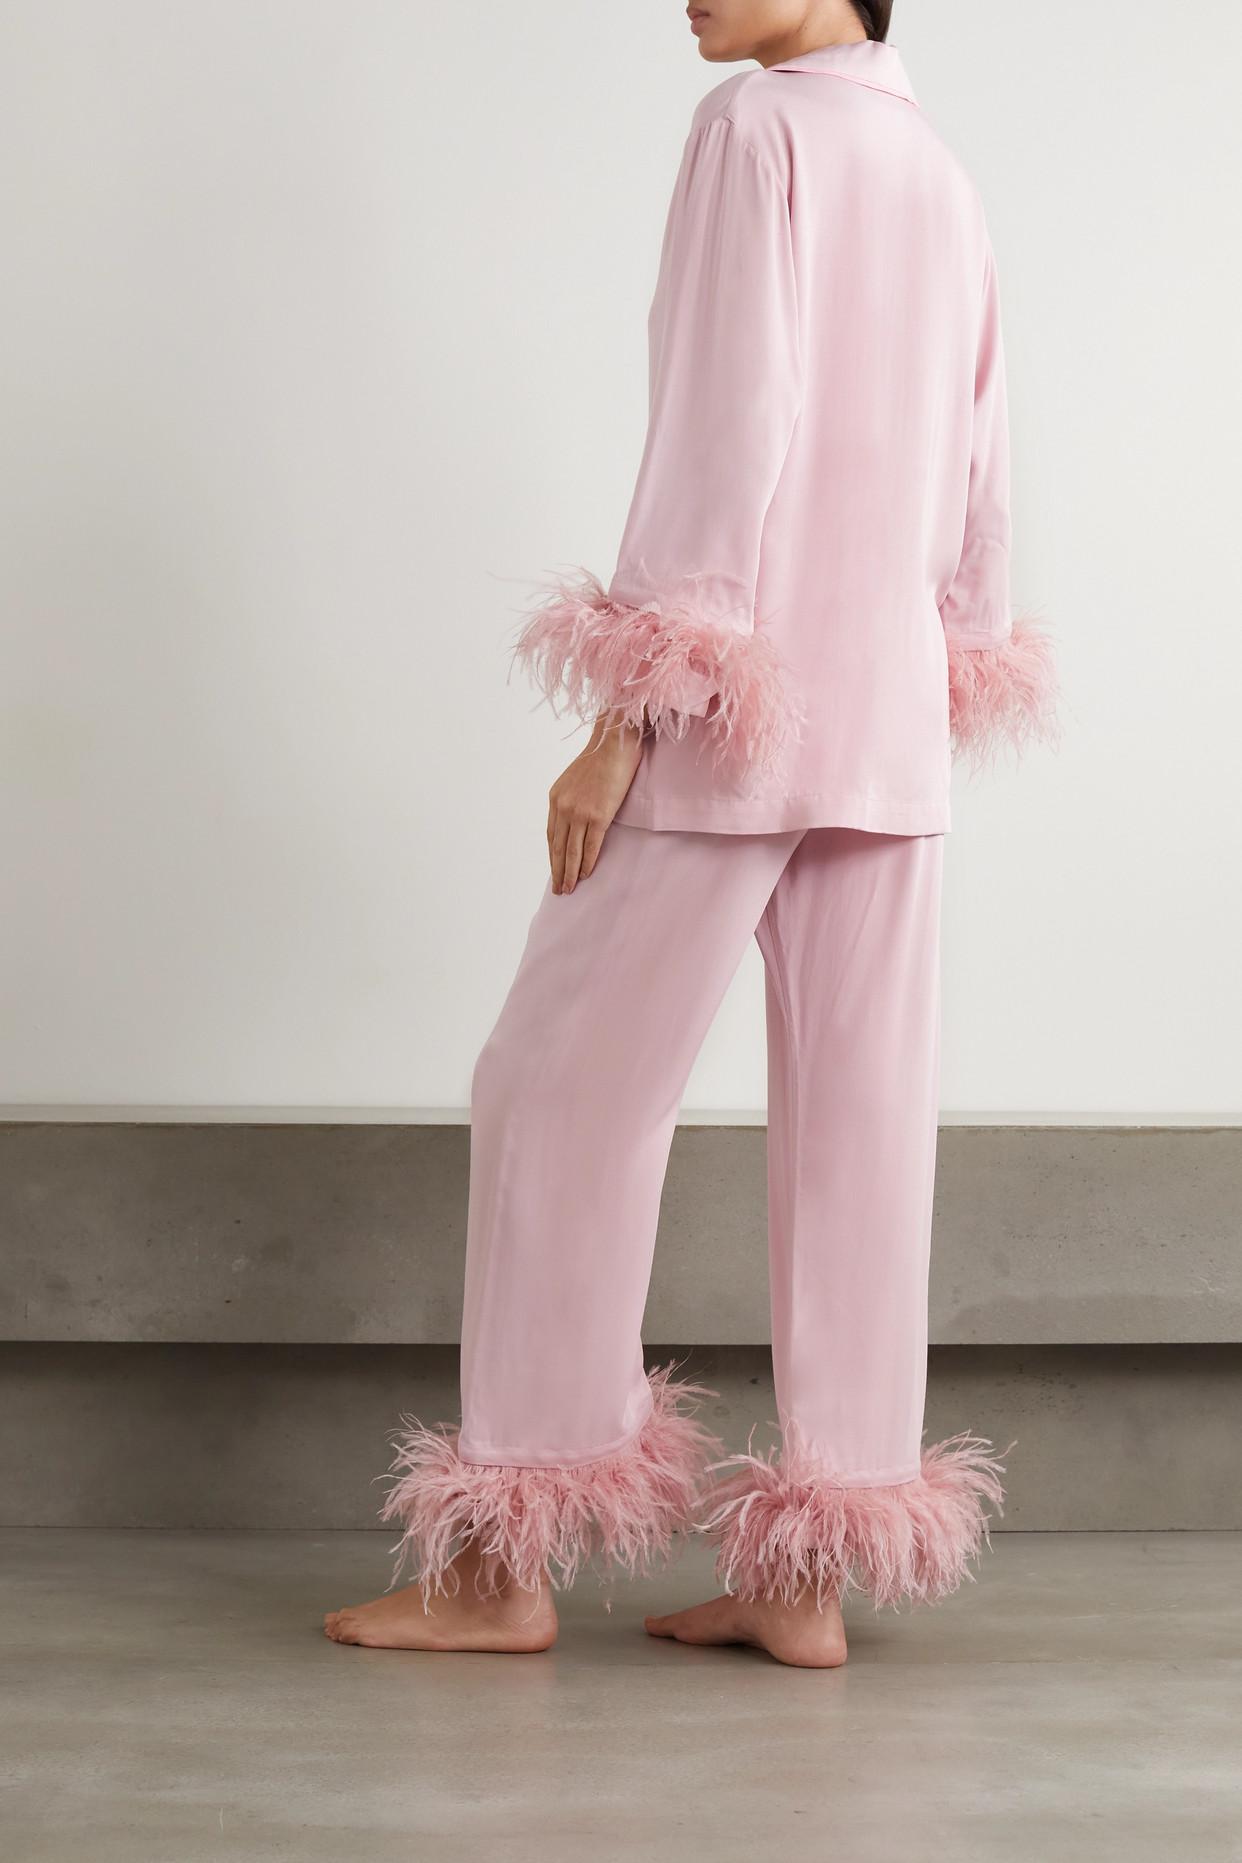 Sleeper + Net Sustain Feather-trimmed Crepe De Chine Pajama Set in Pink